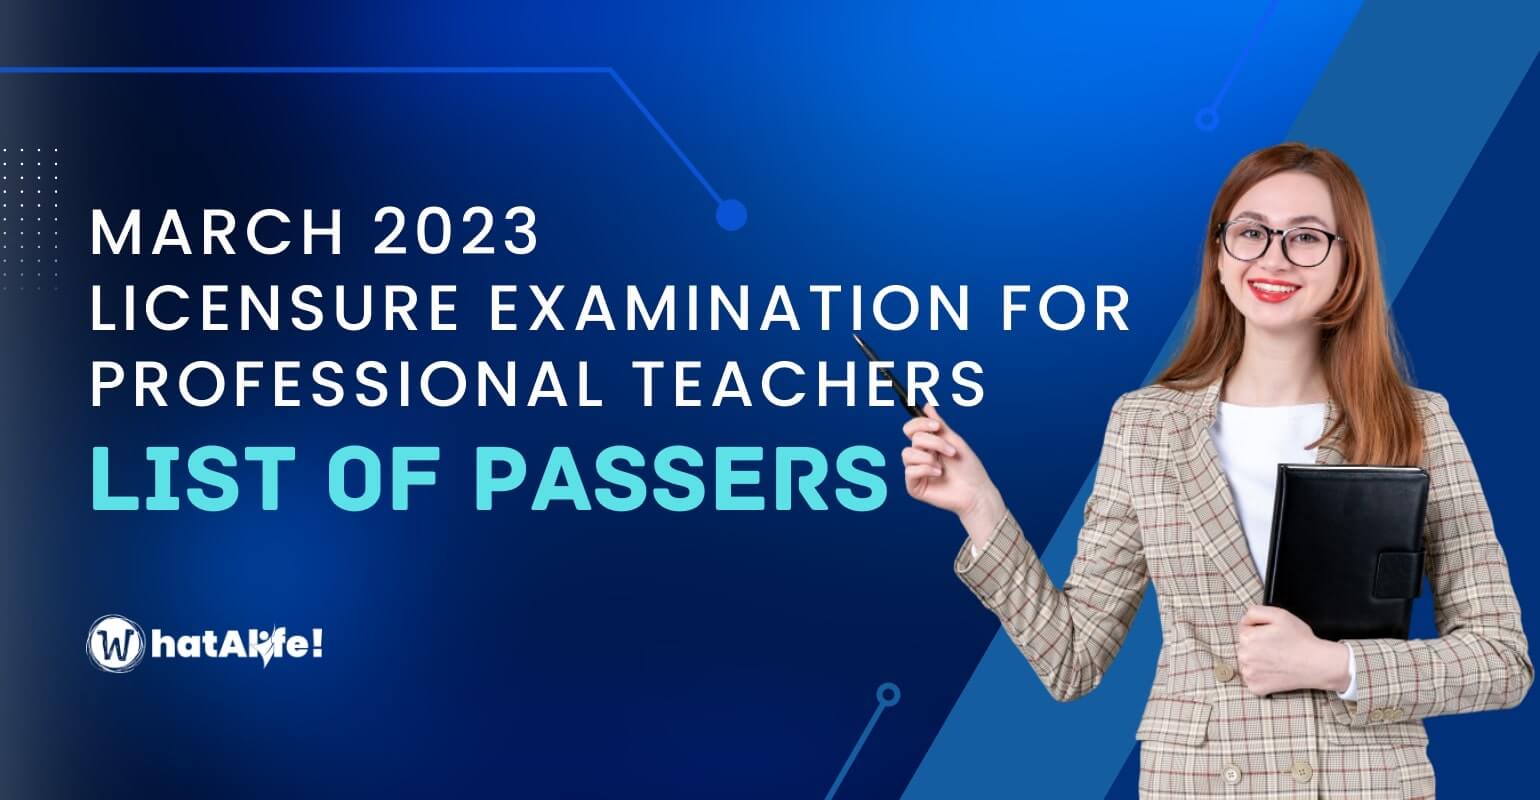 Full List of Passers — March 2023 Licensure Exam for Teachers (LET)